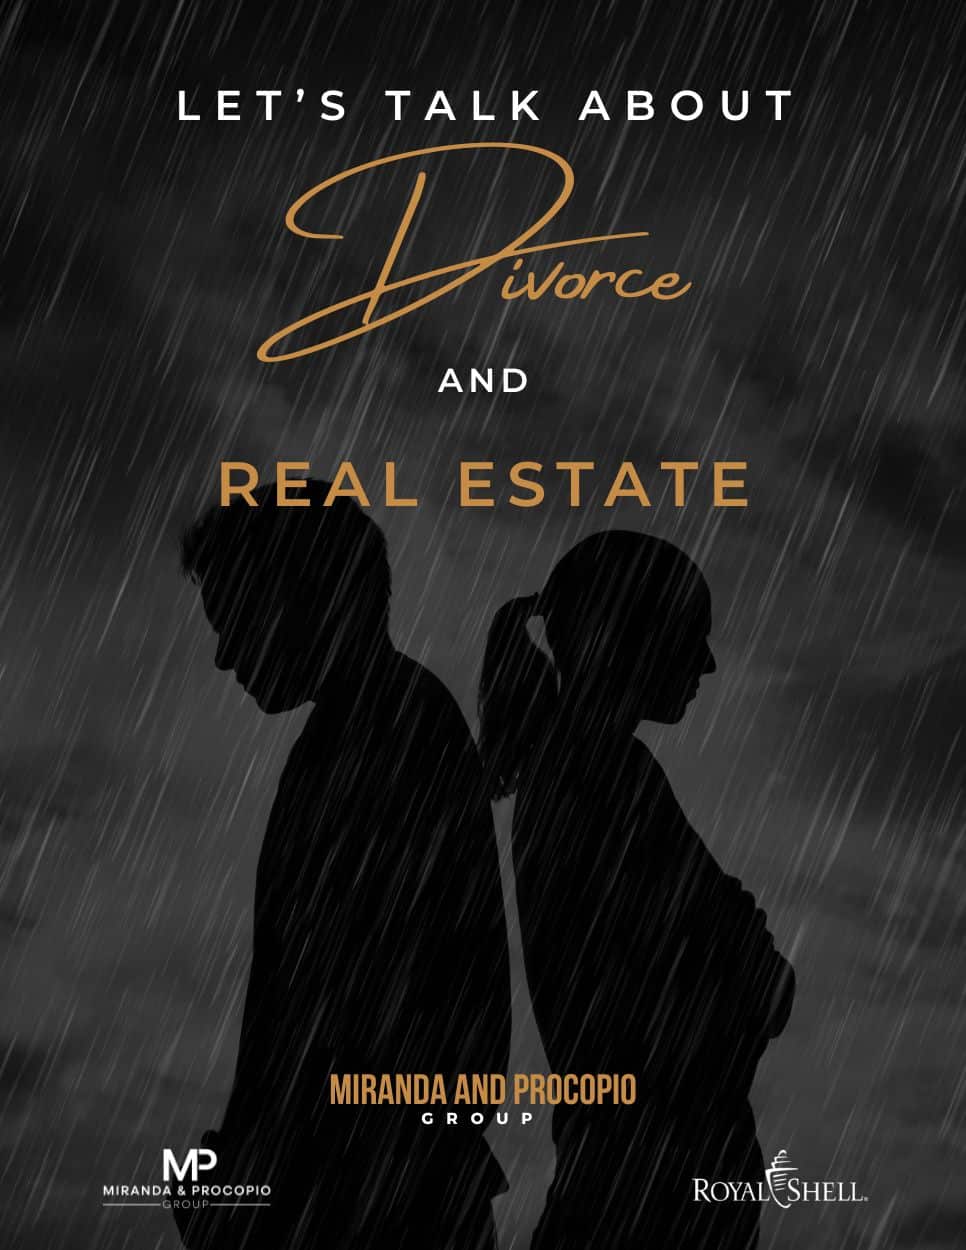 Let's Talk About Divorce and Real Estate ebook cover